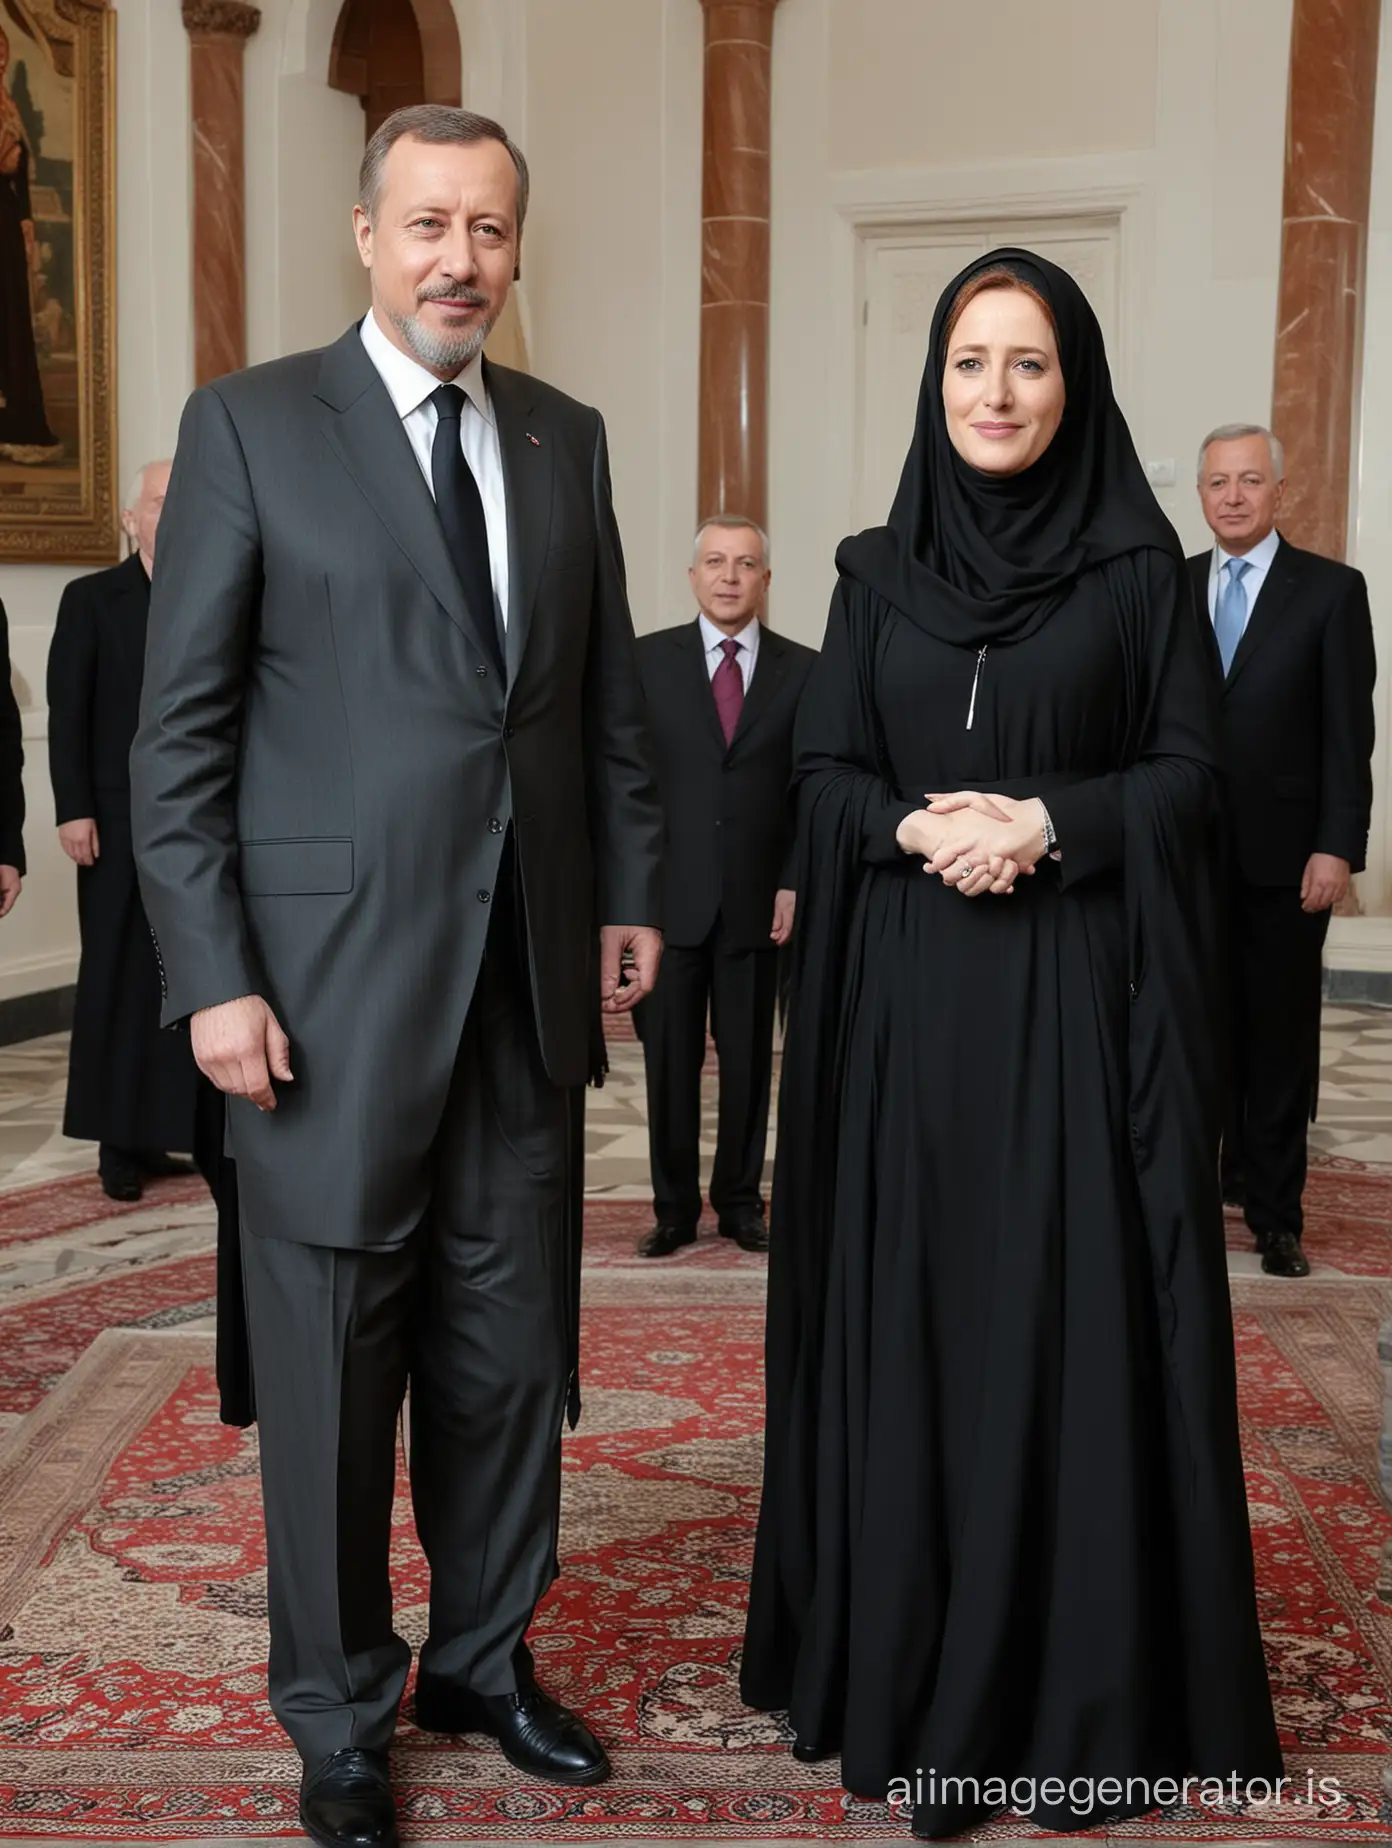 red haired Gillian Anderson with President Erdogan, he asked Gillian to dress accordingly to his Muslim faith and wear a floor-length flowing oversized black jilbab with long black hijab and stand demurely beside him as his submissive wife